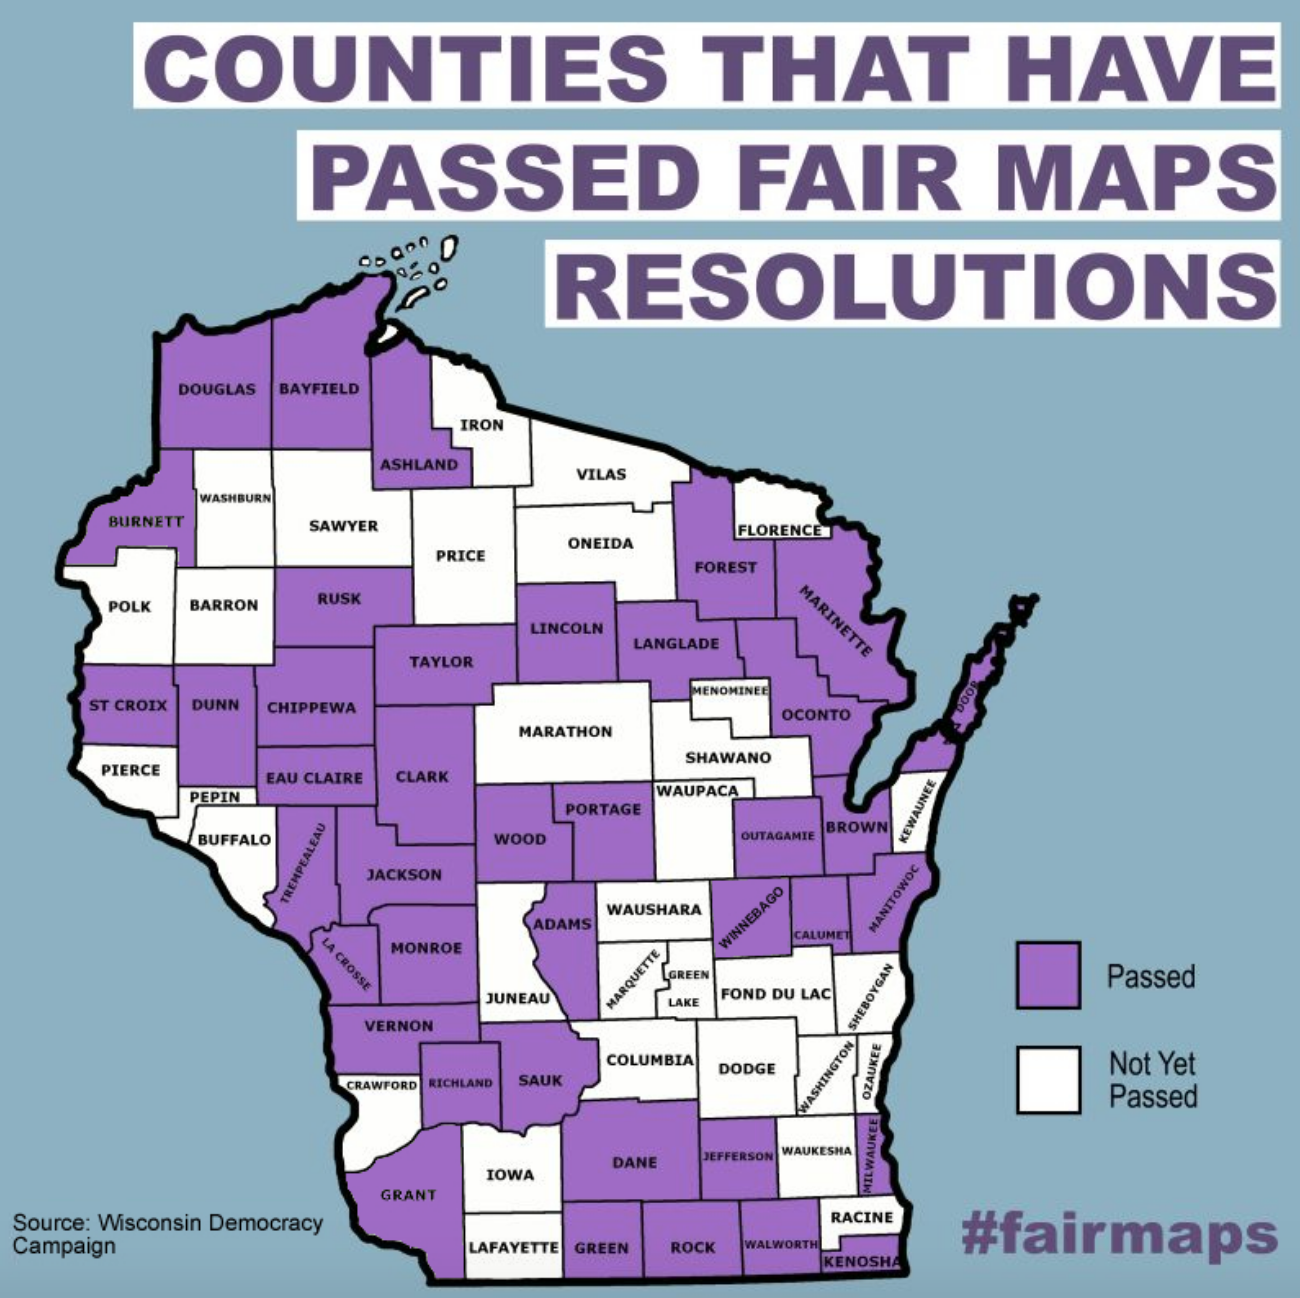 Map of Wisconsin after Winnebago Co becomes 40th County to join fair maps resolution